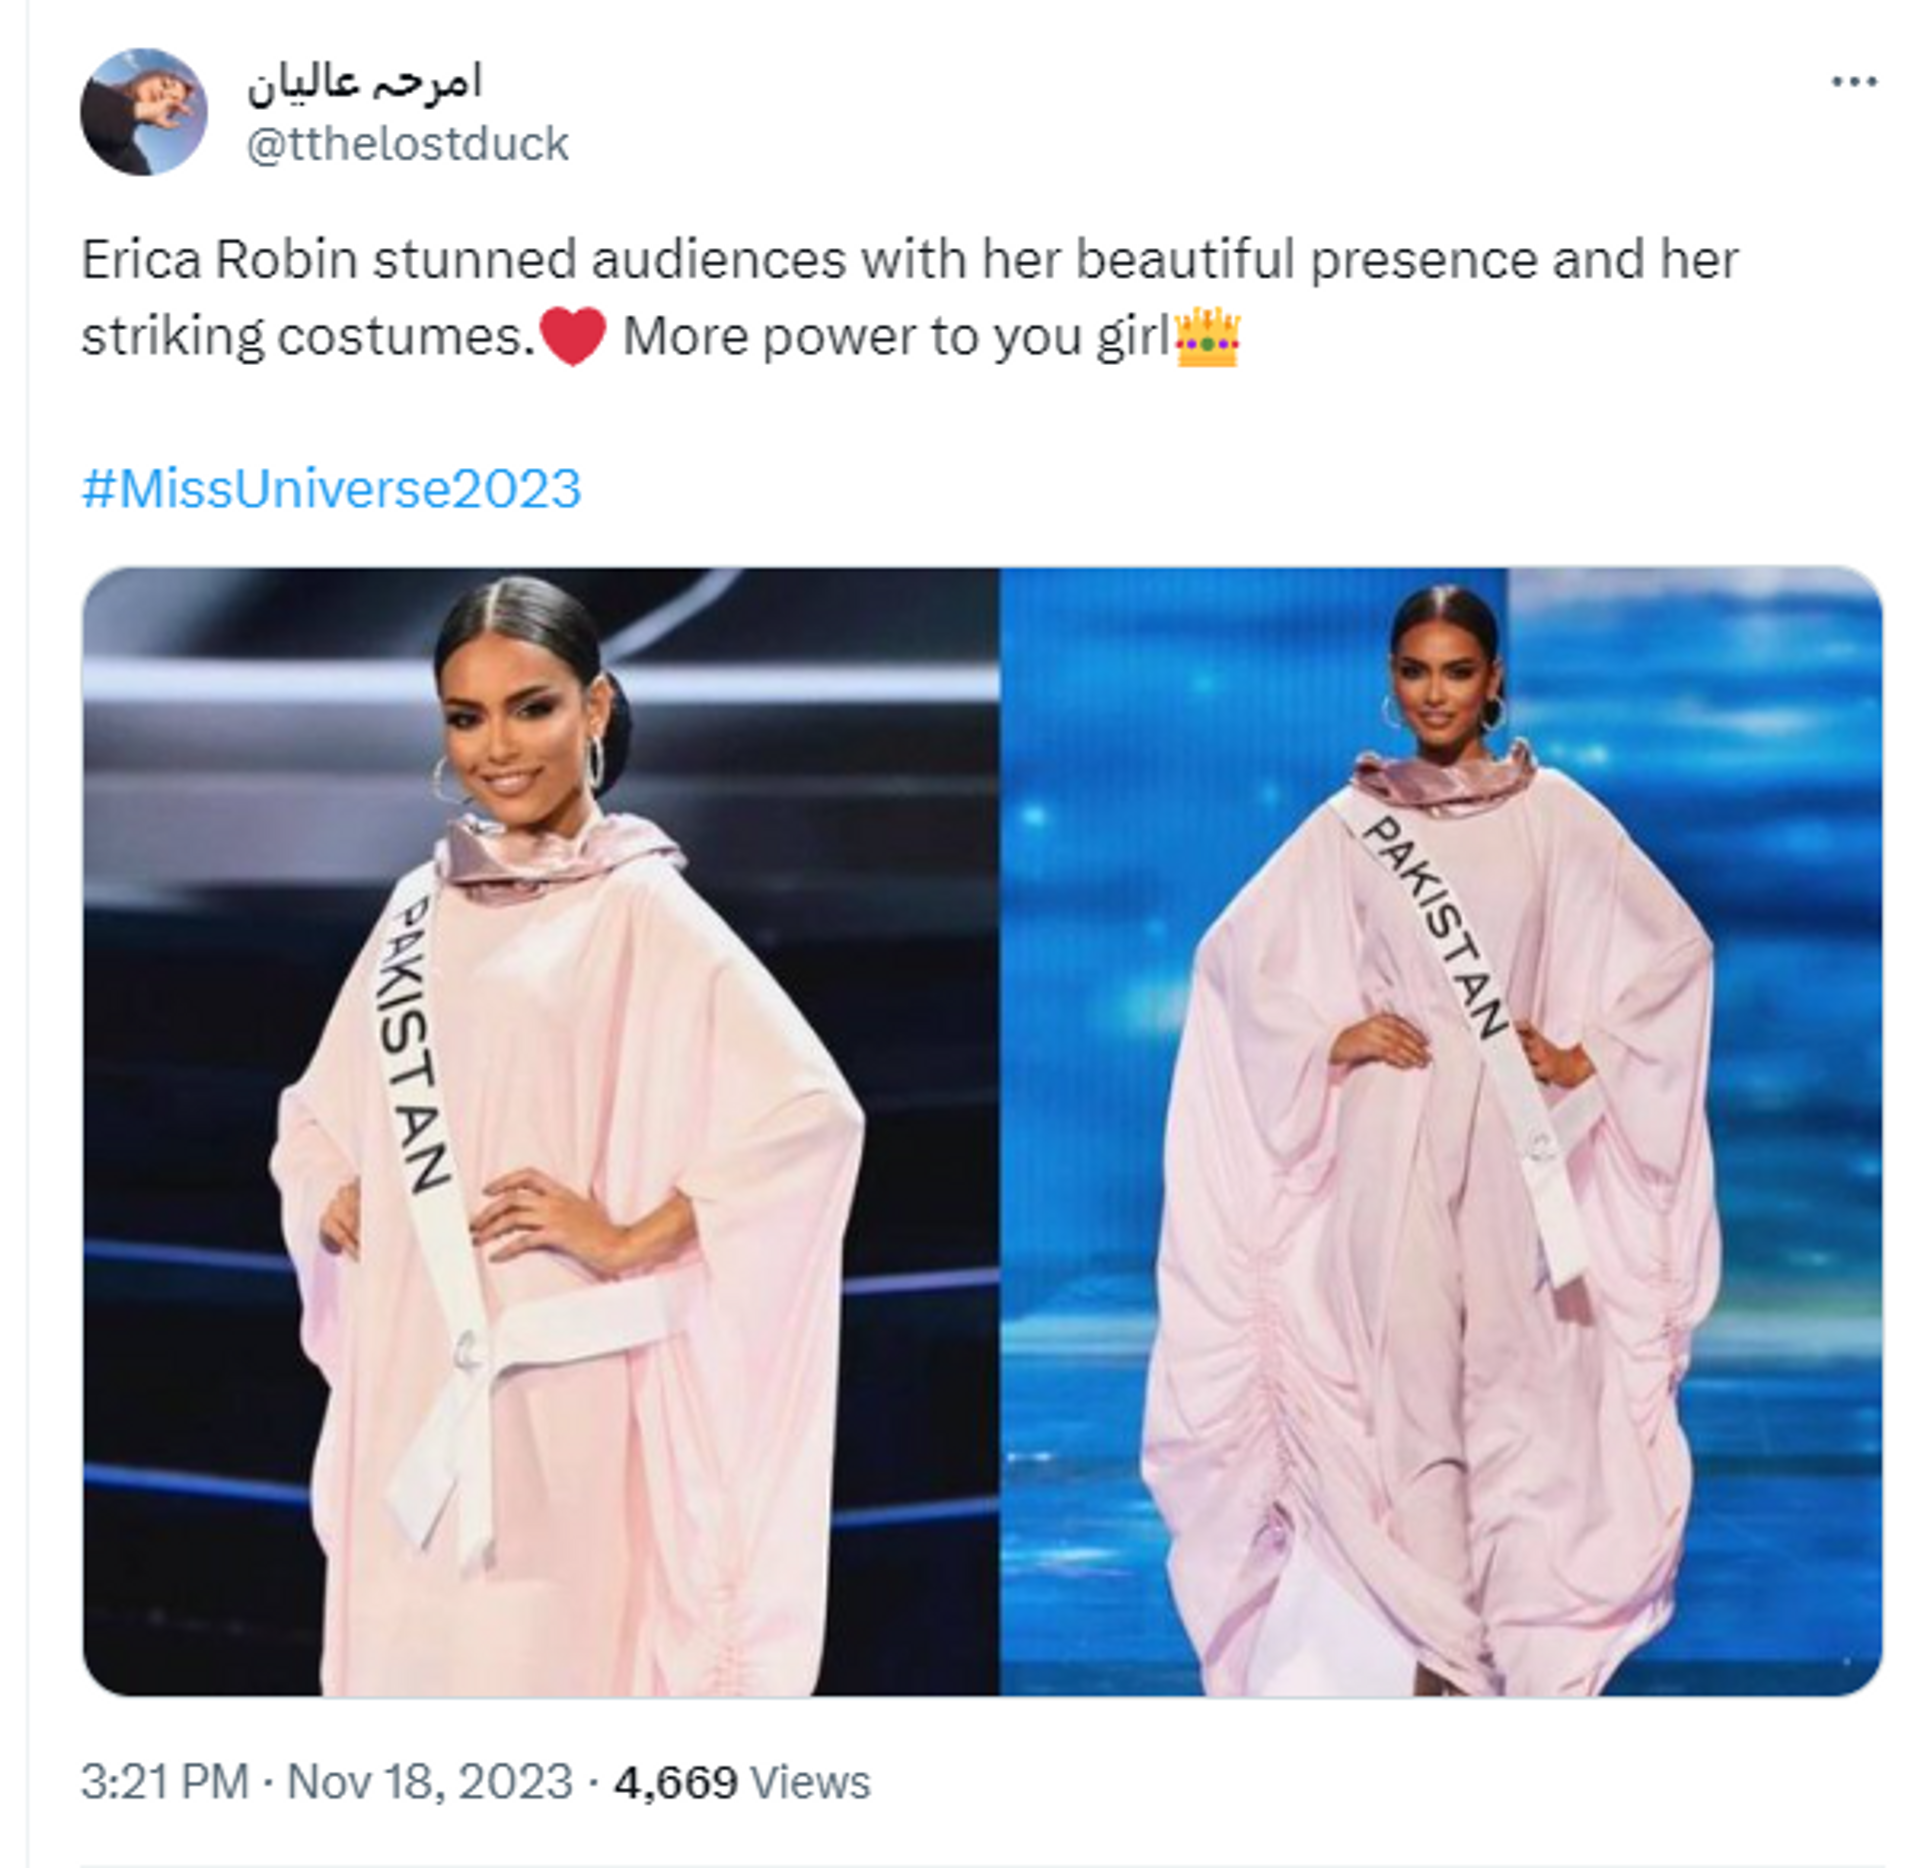 Miss Pakistan Wins Praises for Breaking Stereotype with Burkini at Miss Universe 23' - Sputnik India, 1920, 19.11.2023